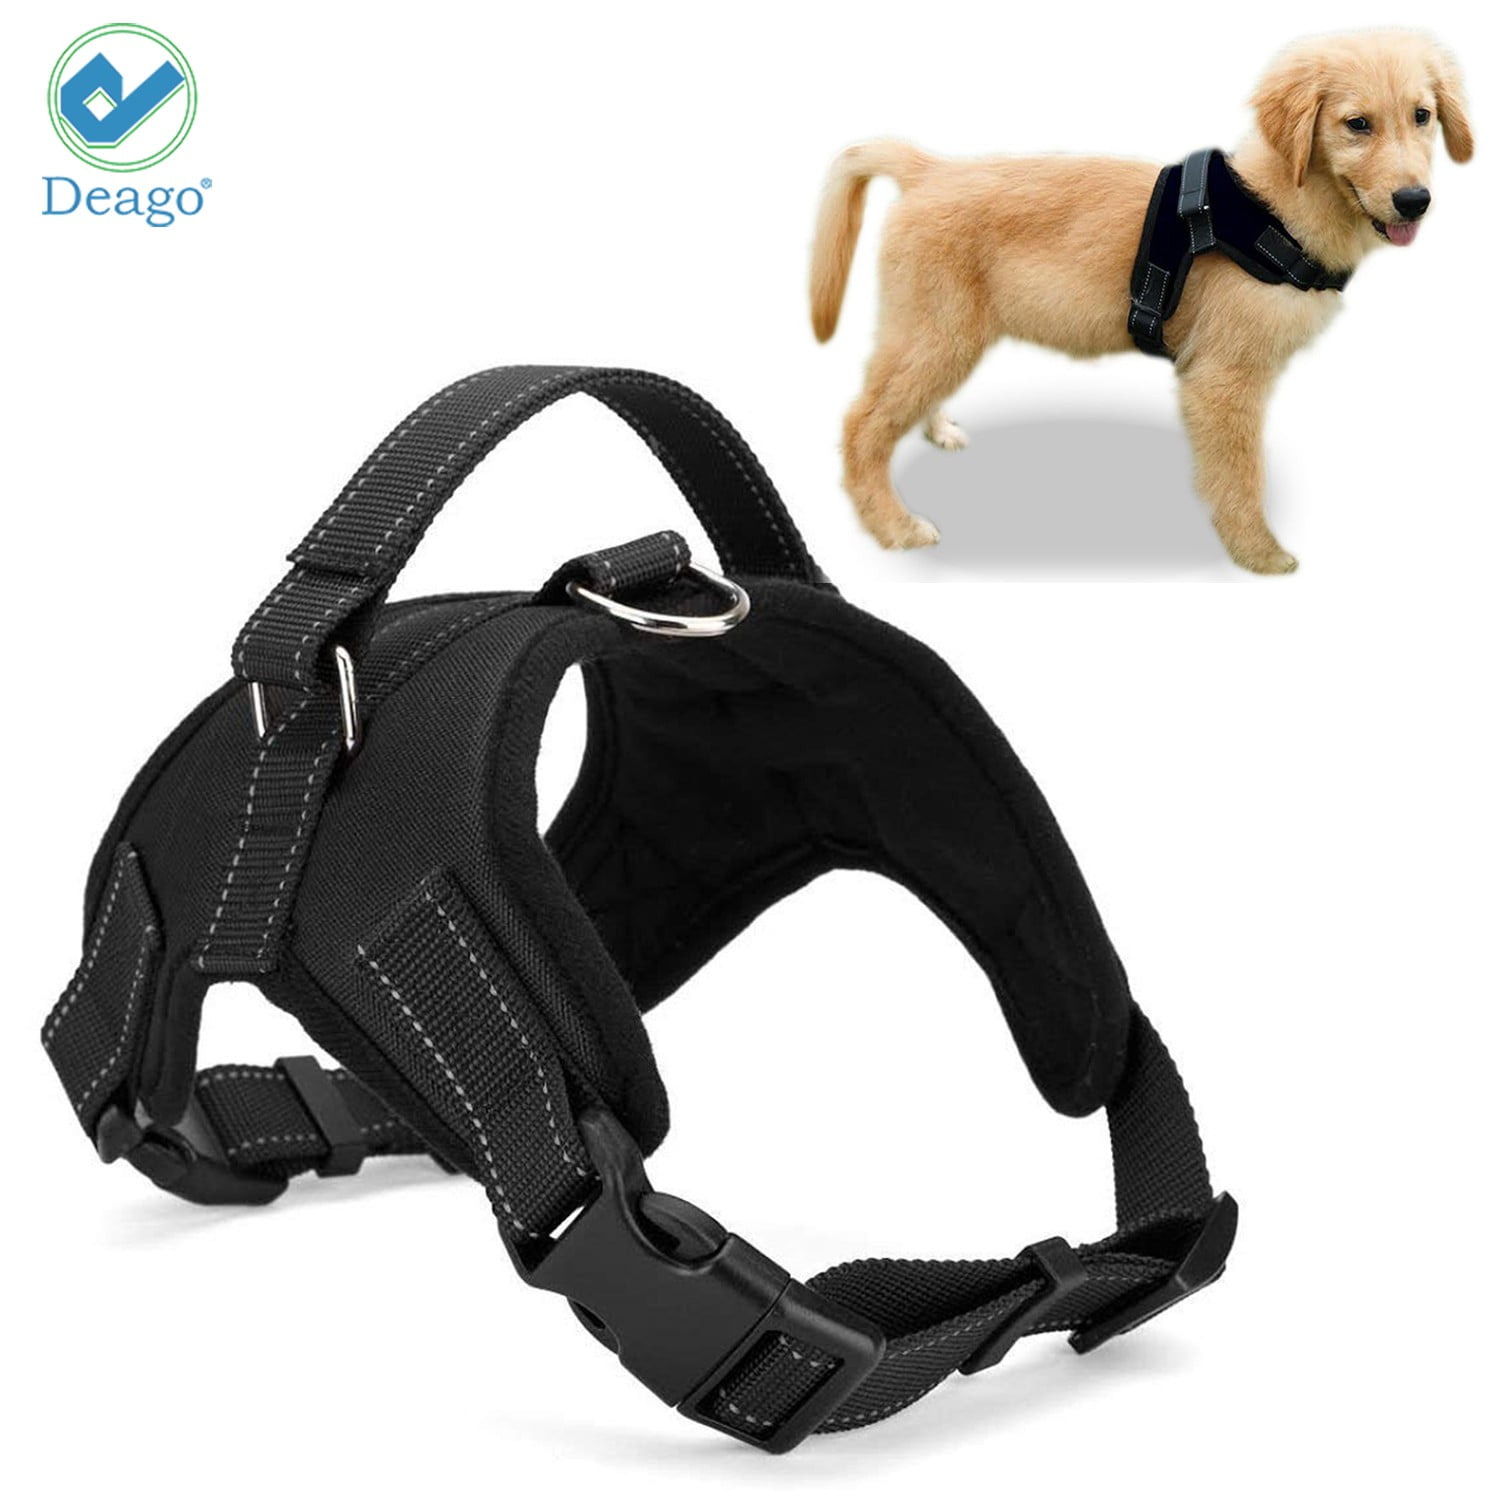 No Pull Lightweight Dog Harness: Adjustable Durable Breathable Mesh Pet Vest Harness with Soft and Comfortable Cushion S, Lilac Easy to Clean for Small Medium Large Dogs 